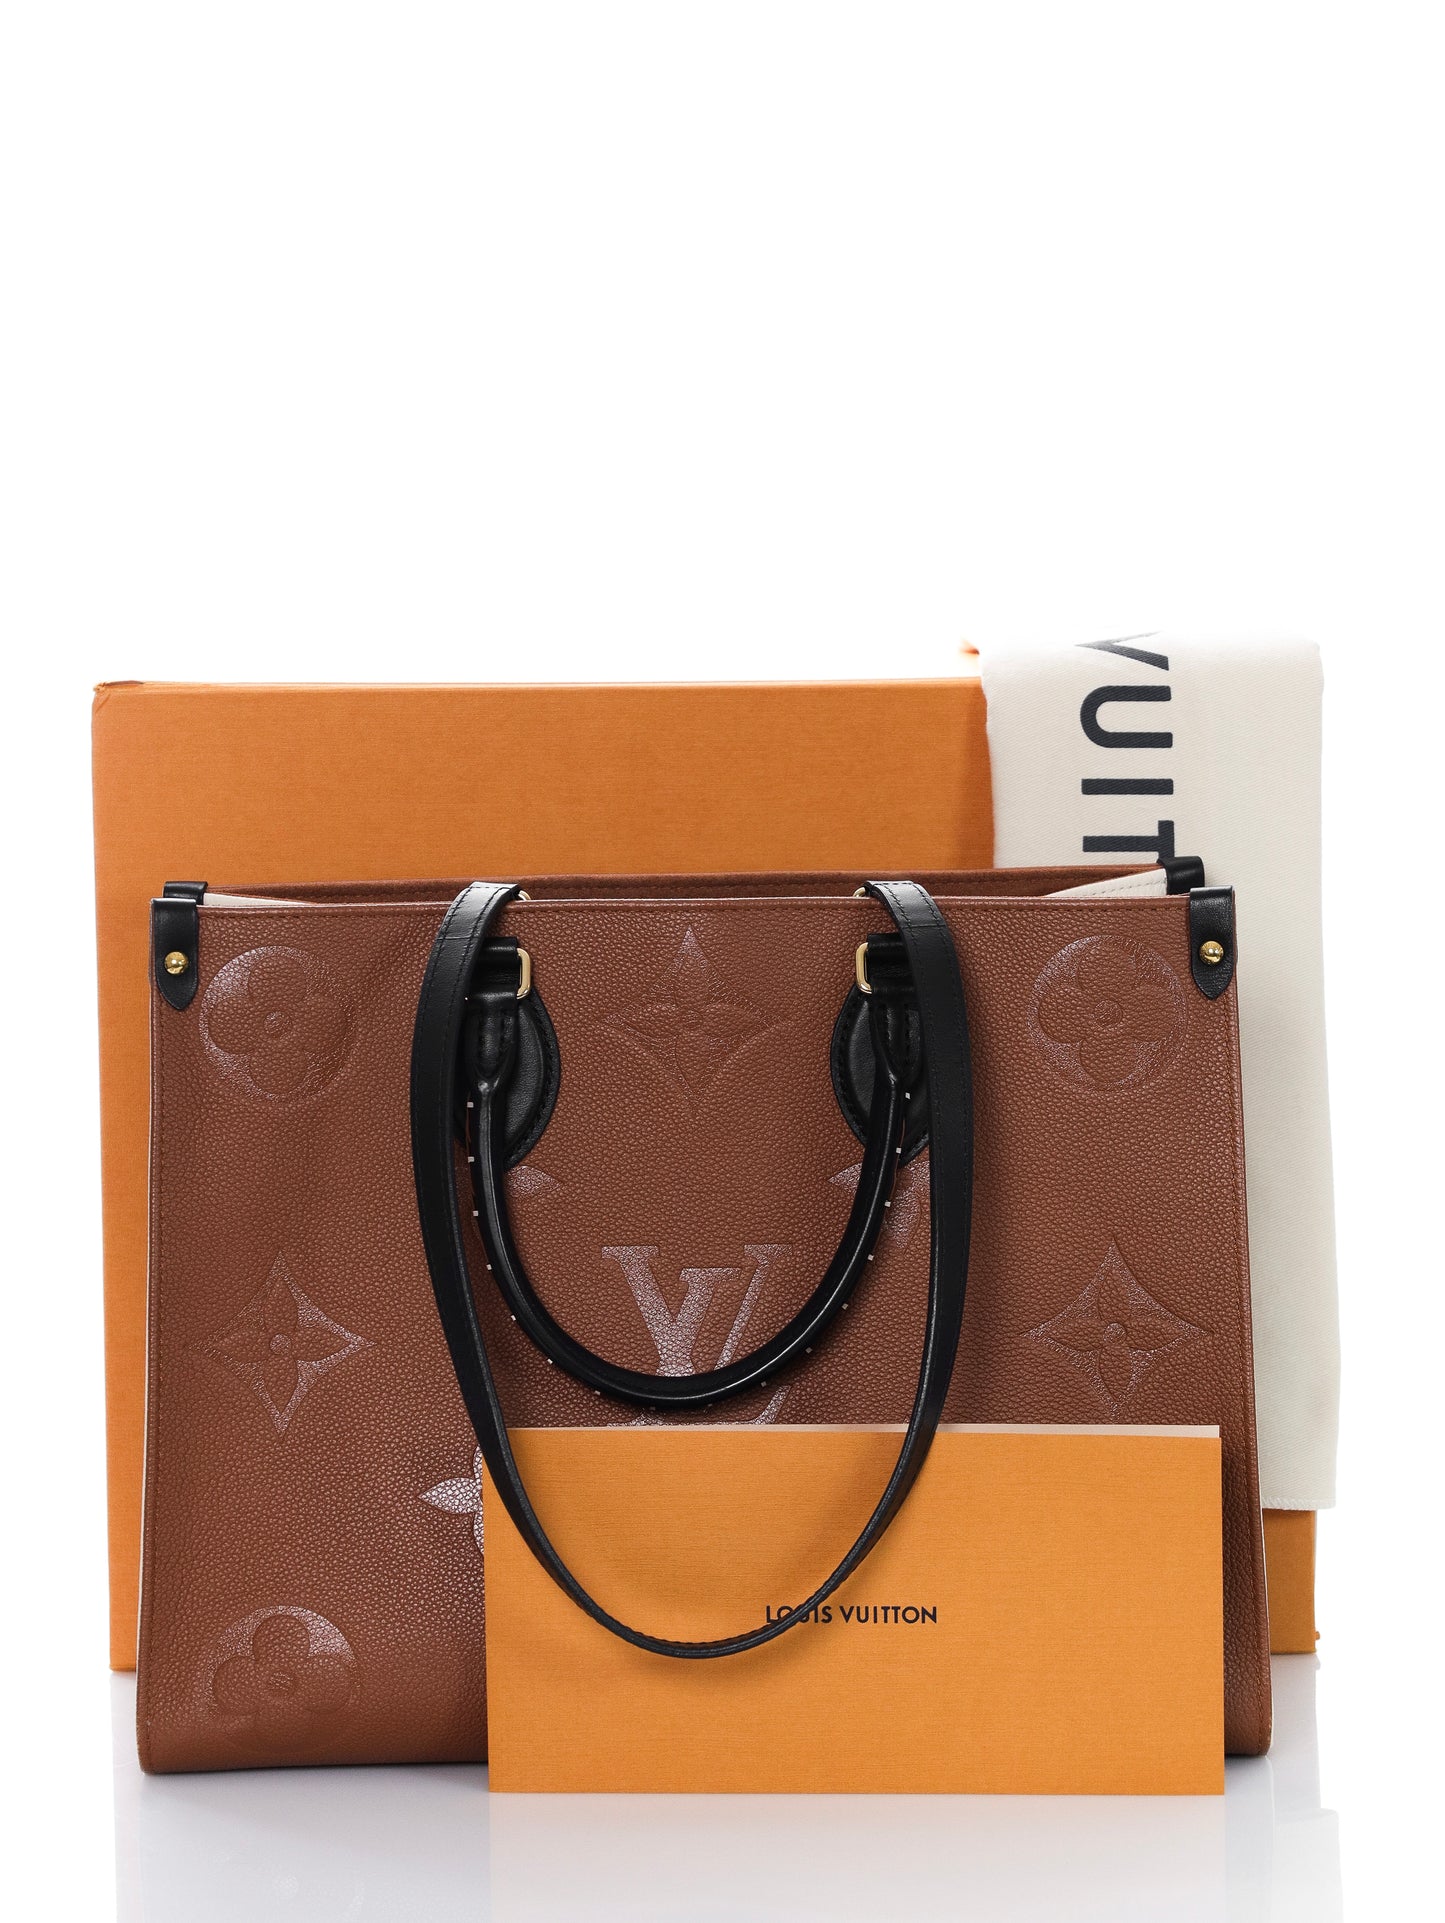 LOUIS VUITTON OnTheGo MM M58521 Wild at Heart Caramello SET COMPLETO